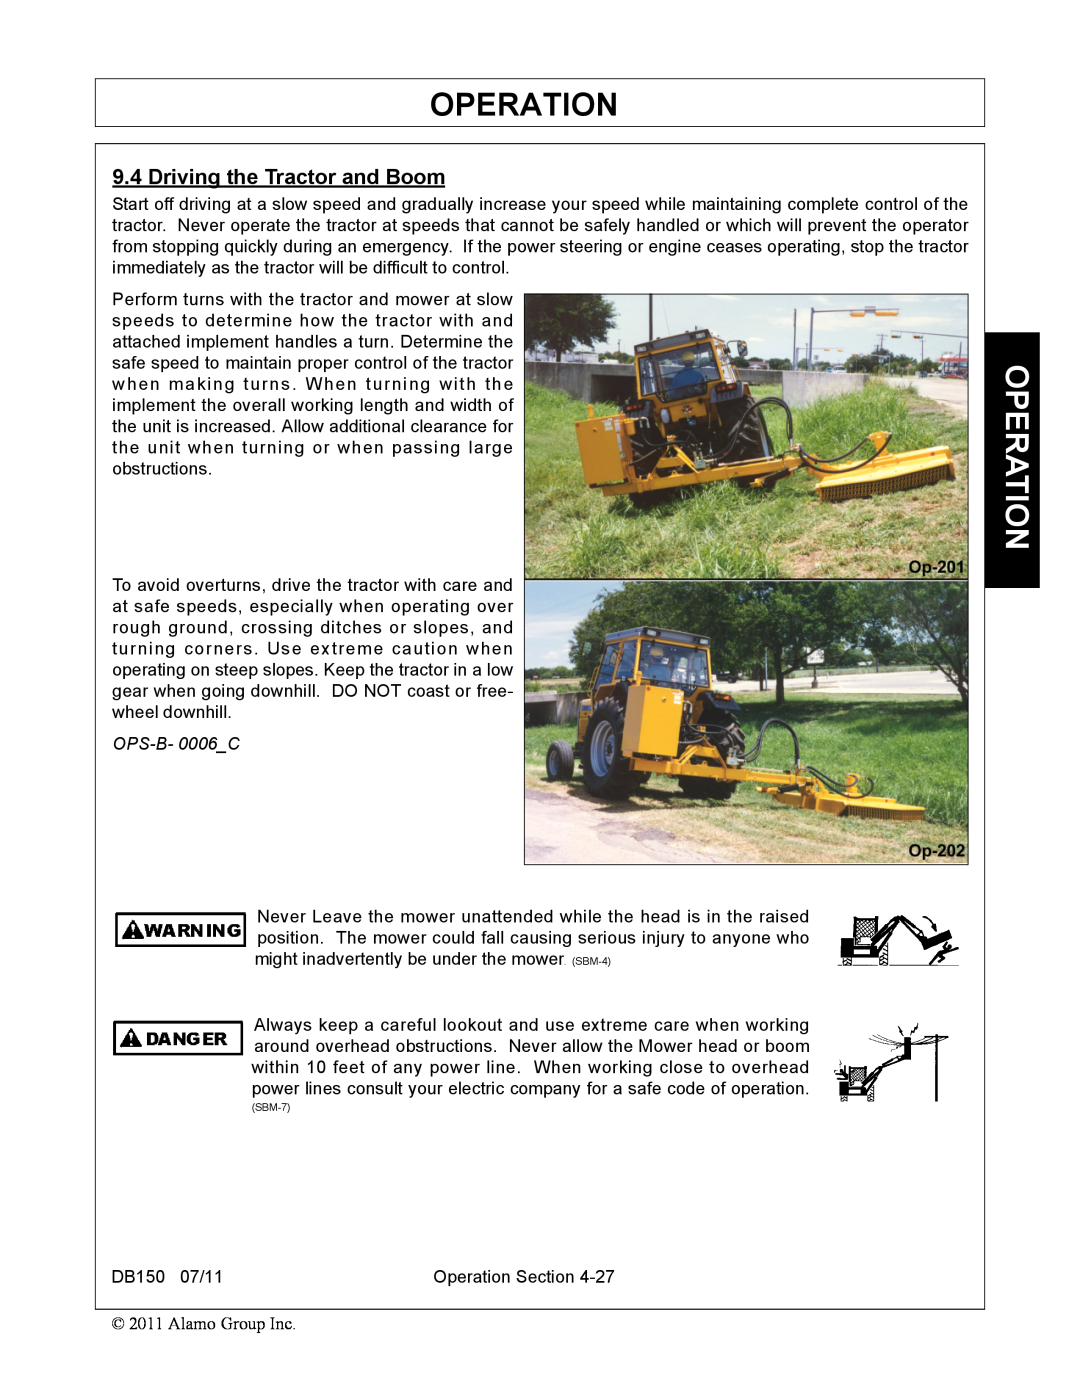 Rhino Mounts DB150 manual Operation, Driving the Tractor and Boom, OPS-B- 0006C 